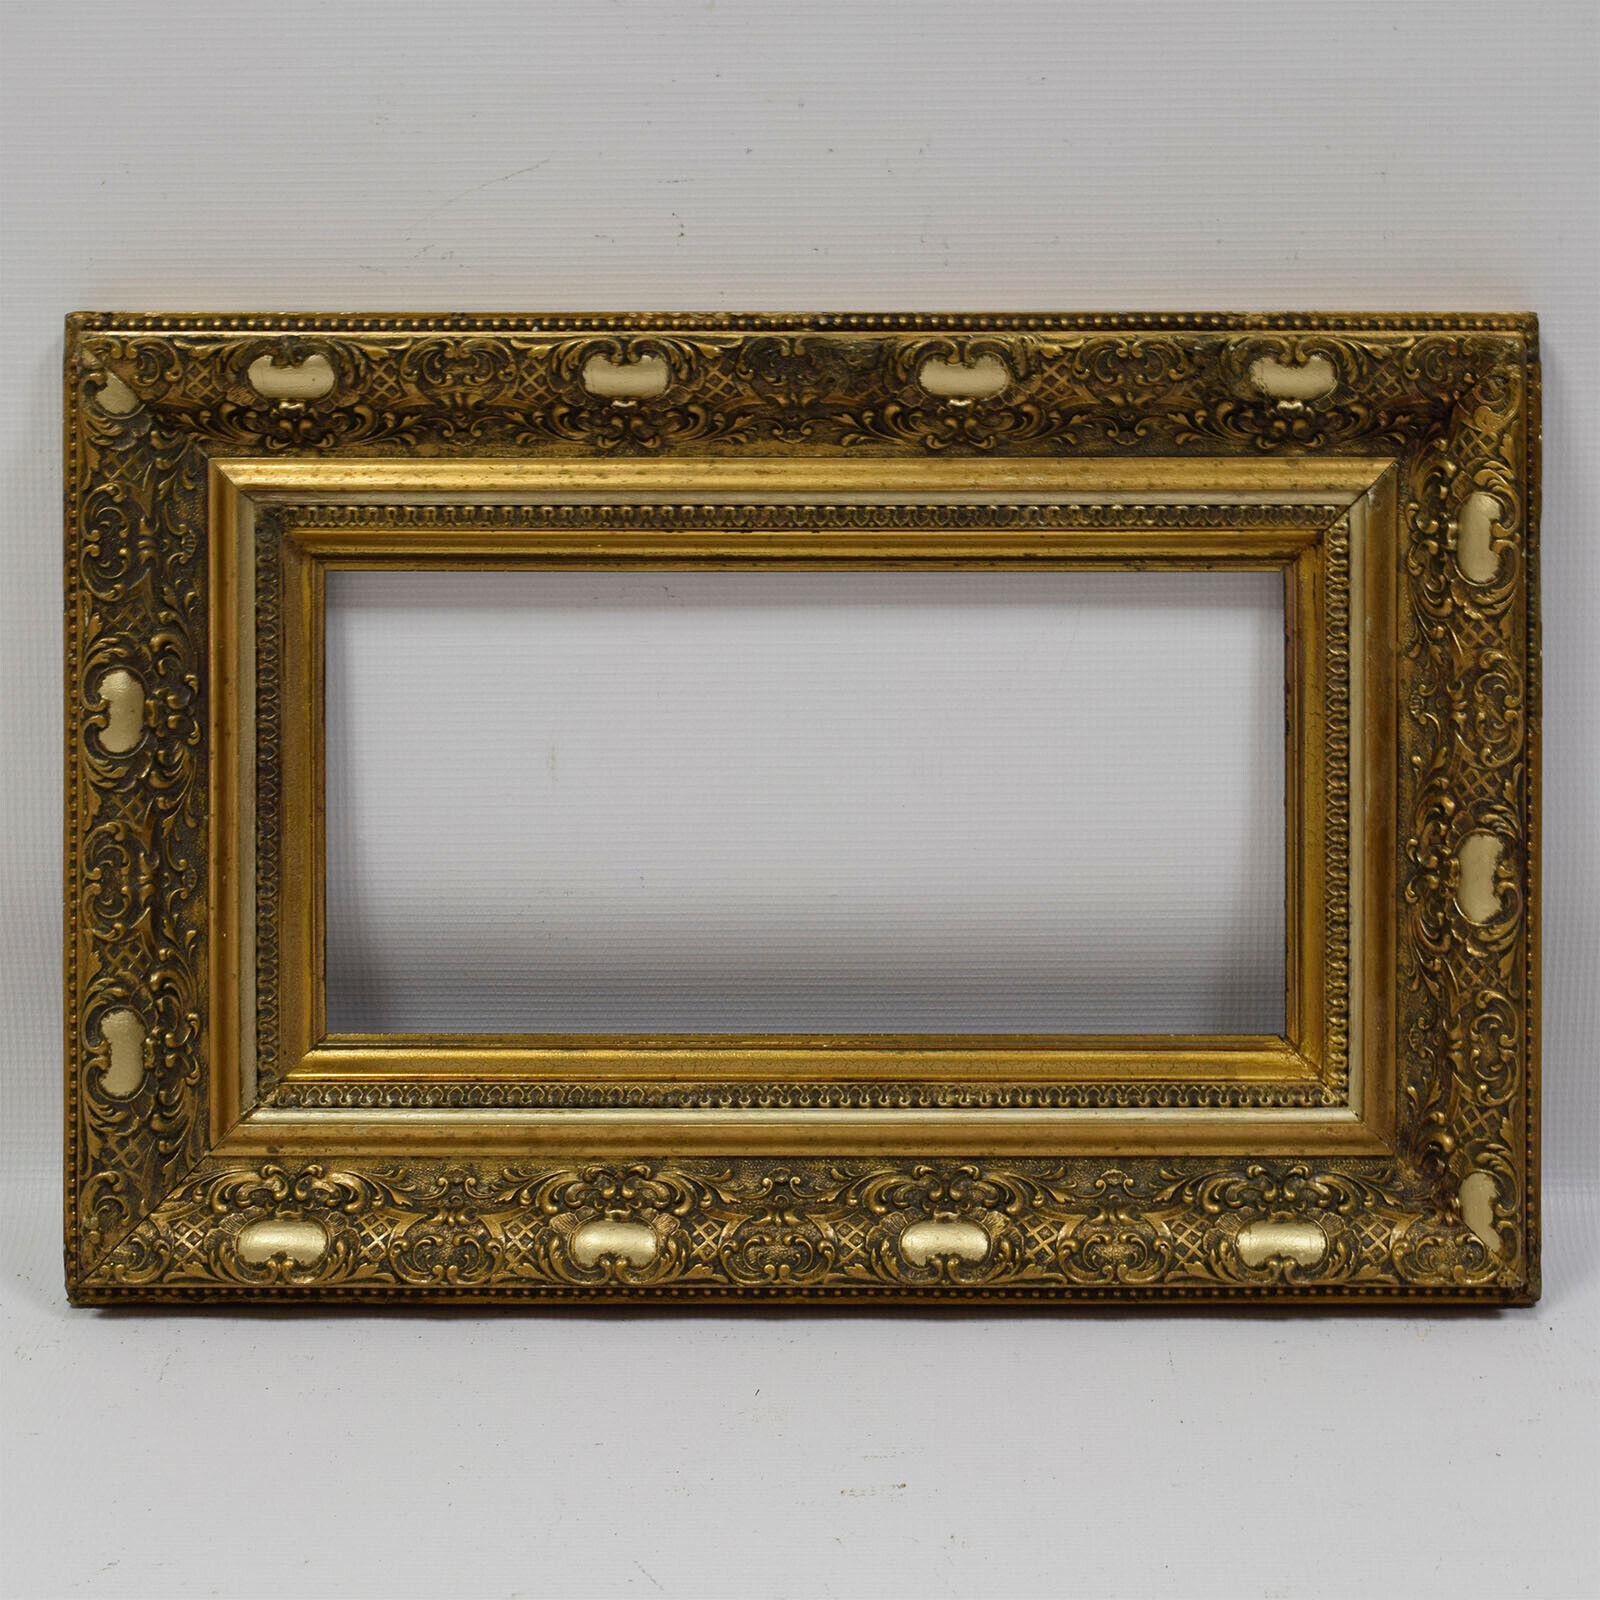 Ca.1900-1920 Old wooden frame original condition Internal: 13,5x7.4 in